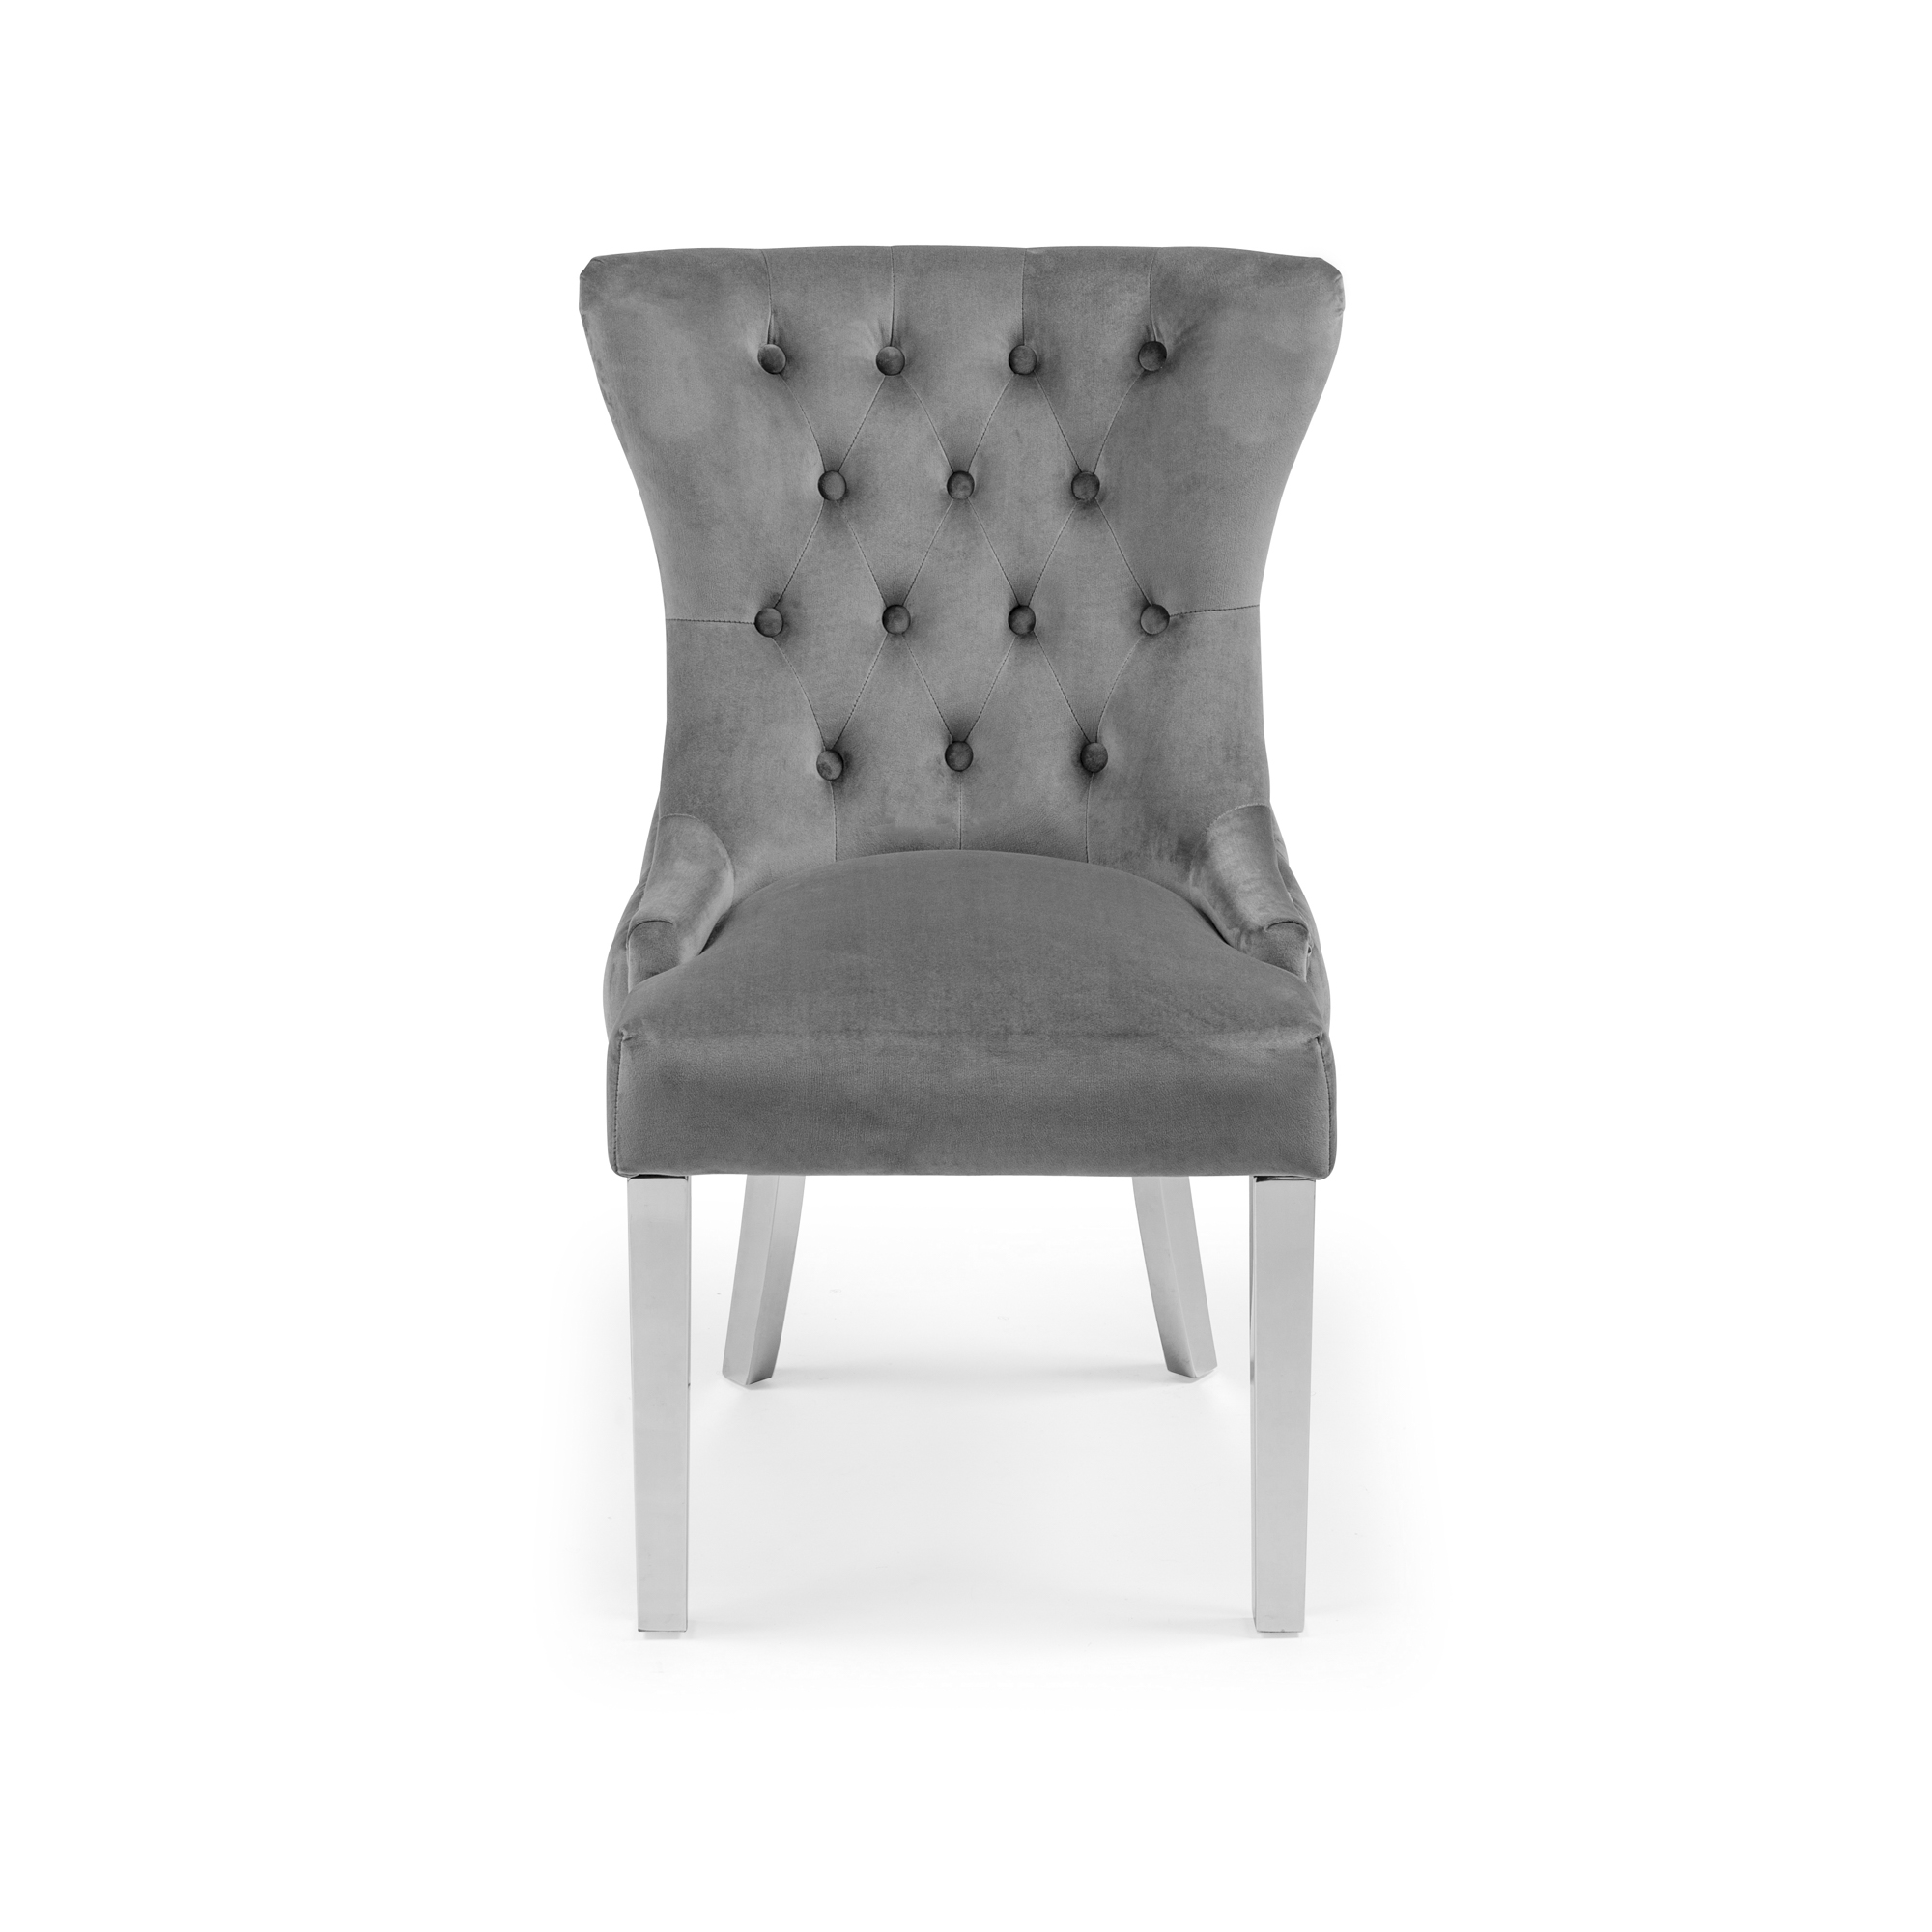 Knightsbridge Buttoned Grey Brushed Velvet Dining Chair with Polished Stainless Steel Legs – Set of